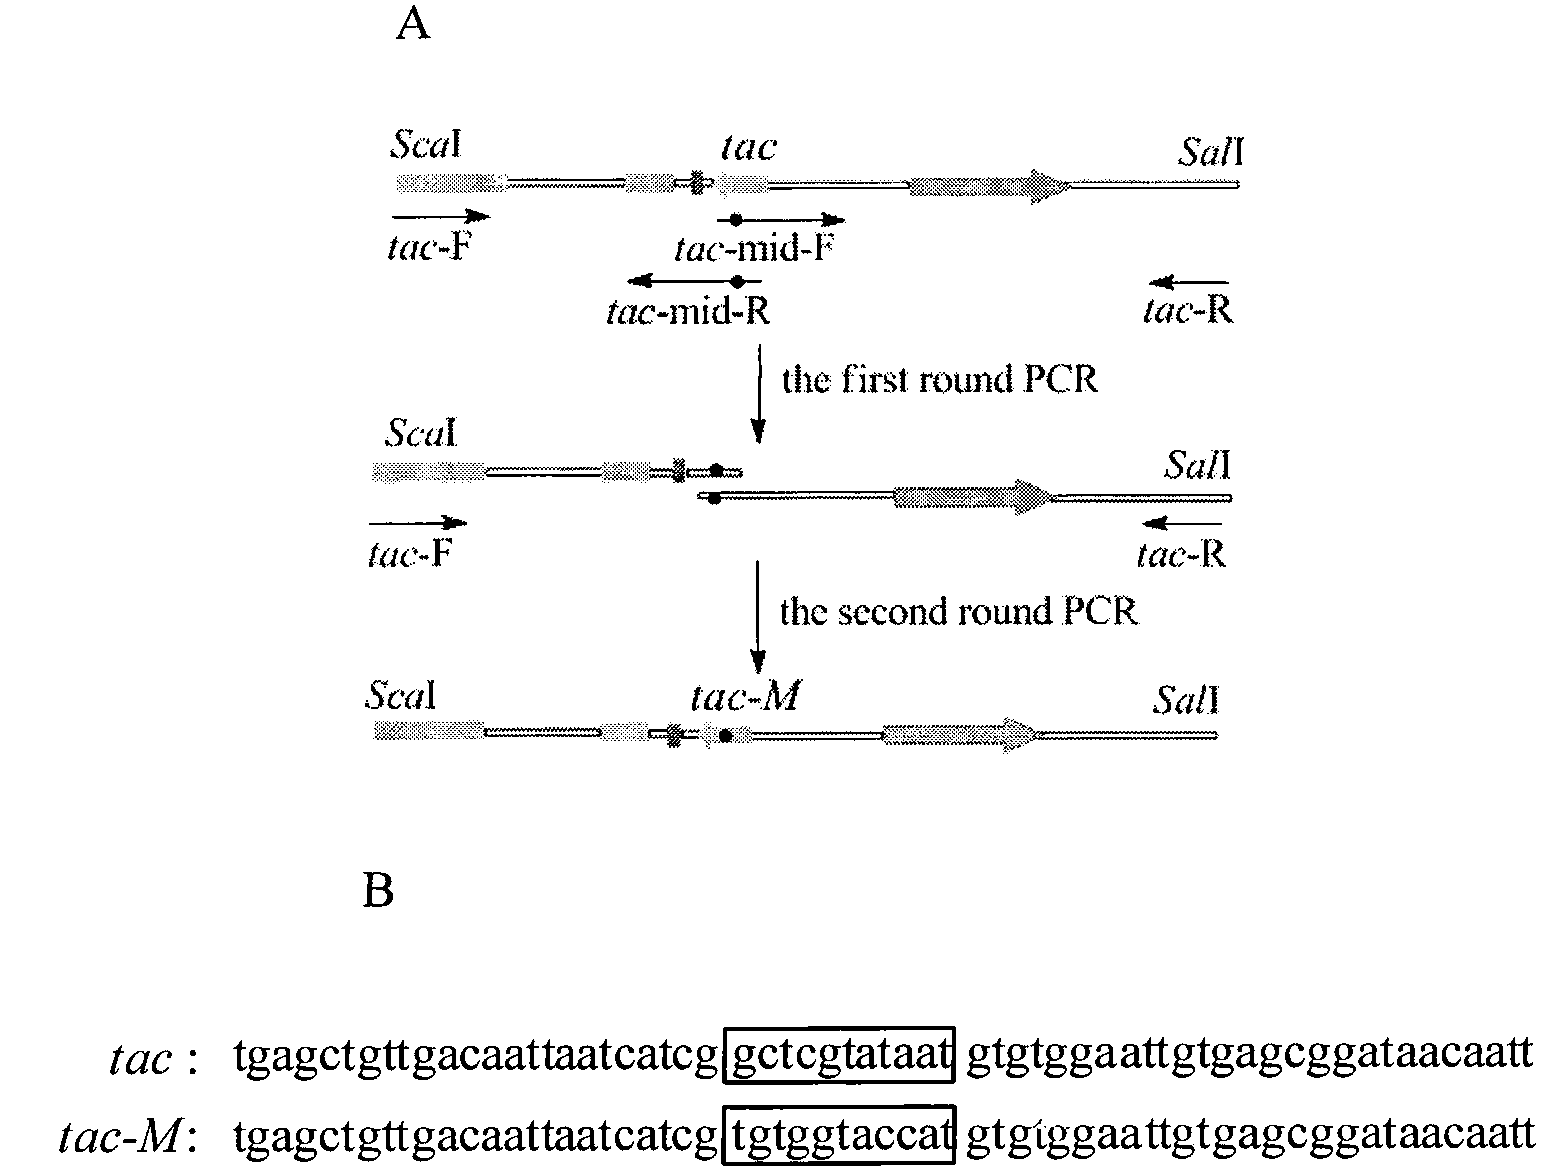 Colibacillus-corynebacterium shuttle constitutive expression carrier and construction method thereof